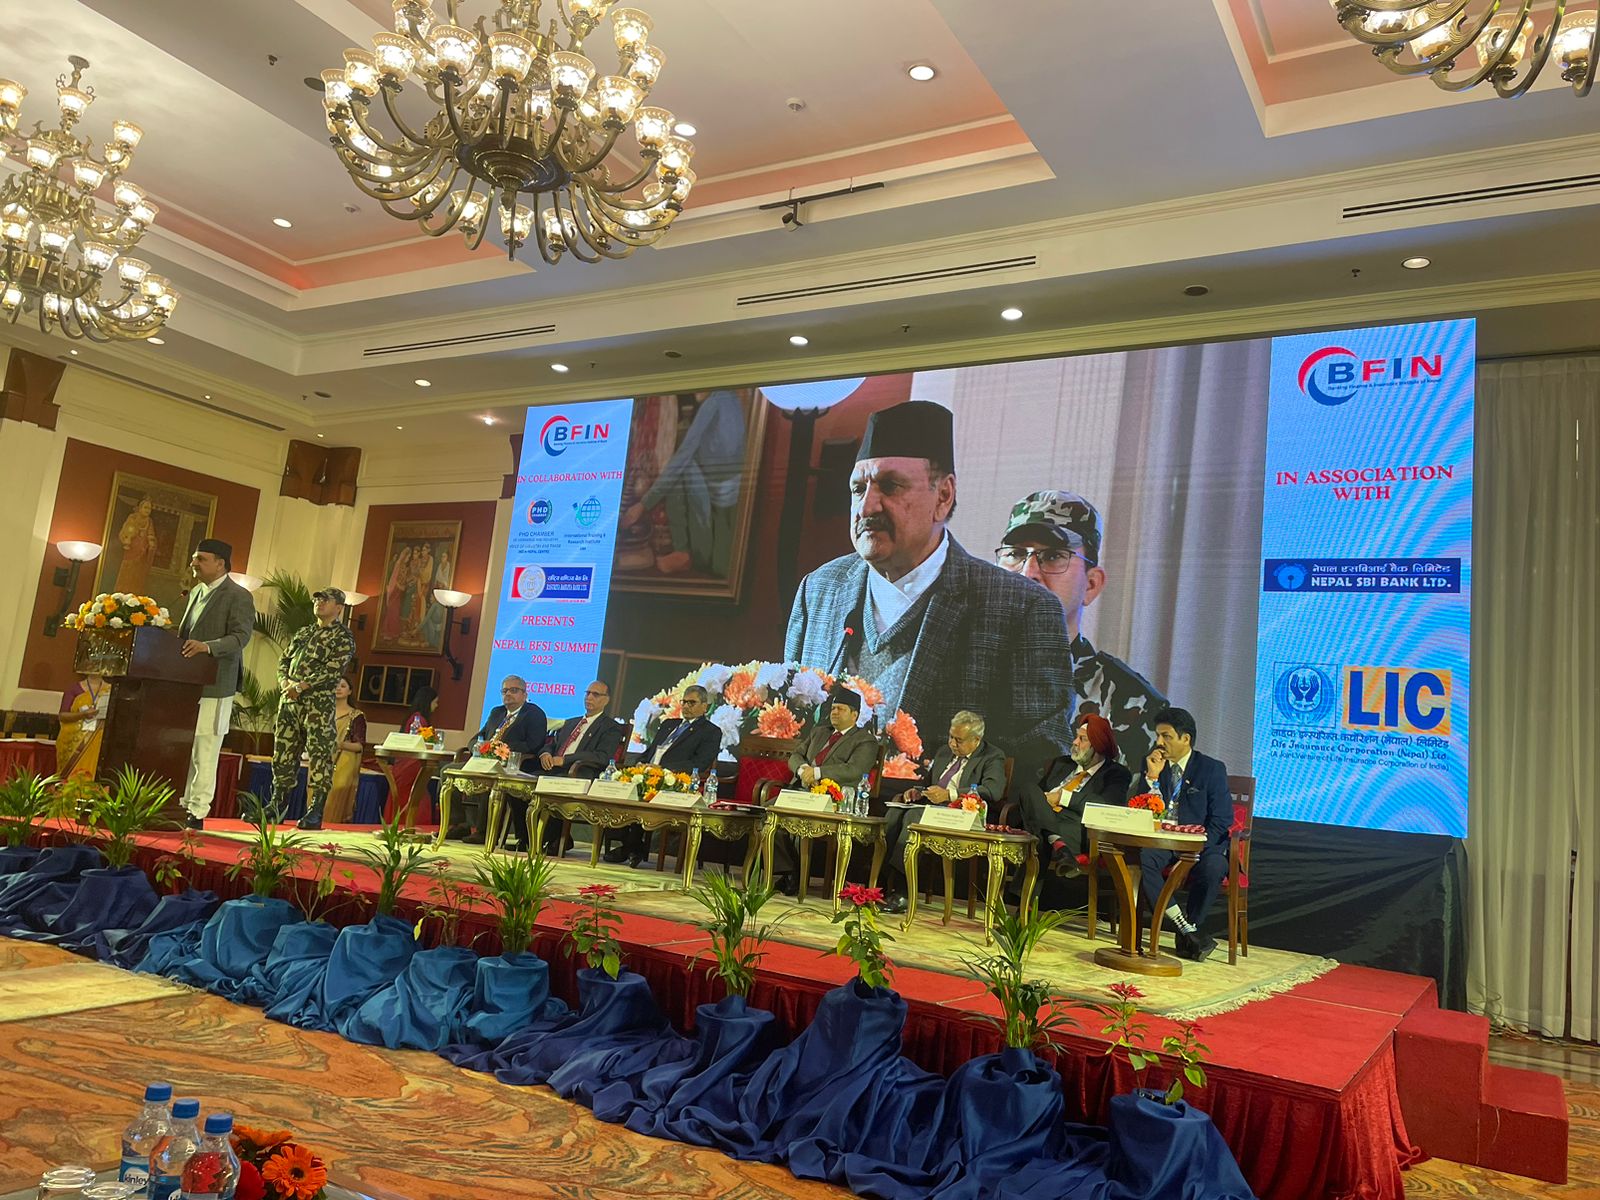 Nepal BFSI Summit 2023 dwells on ways to promote financial collaboration for economic growth